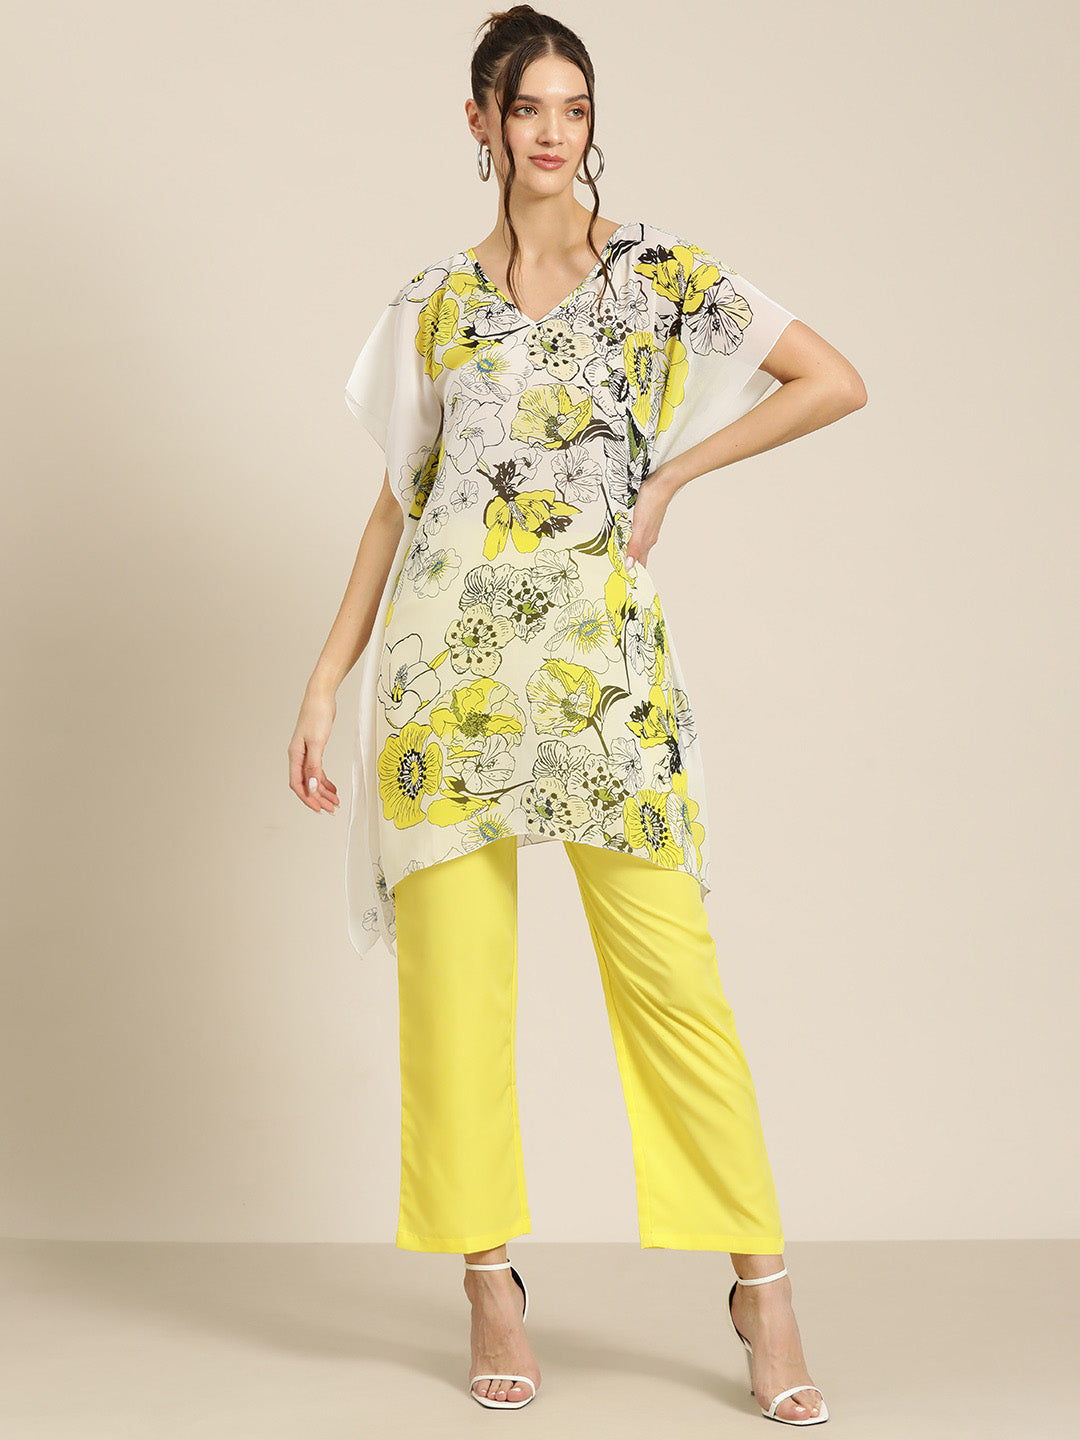 Neon yellow V-Neck top with pant co-ord set.